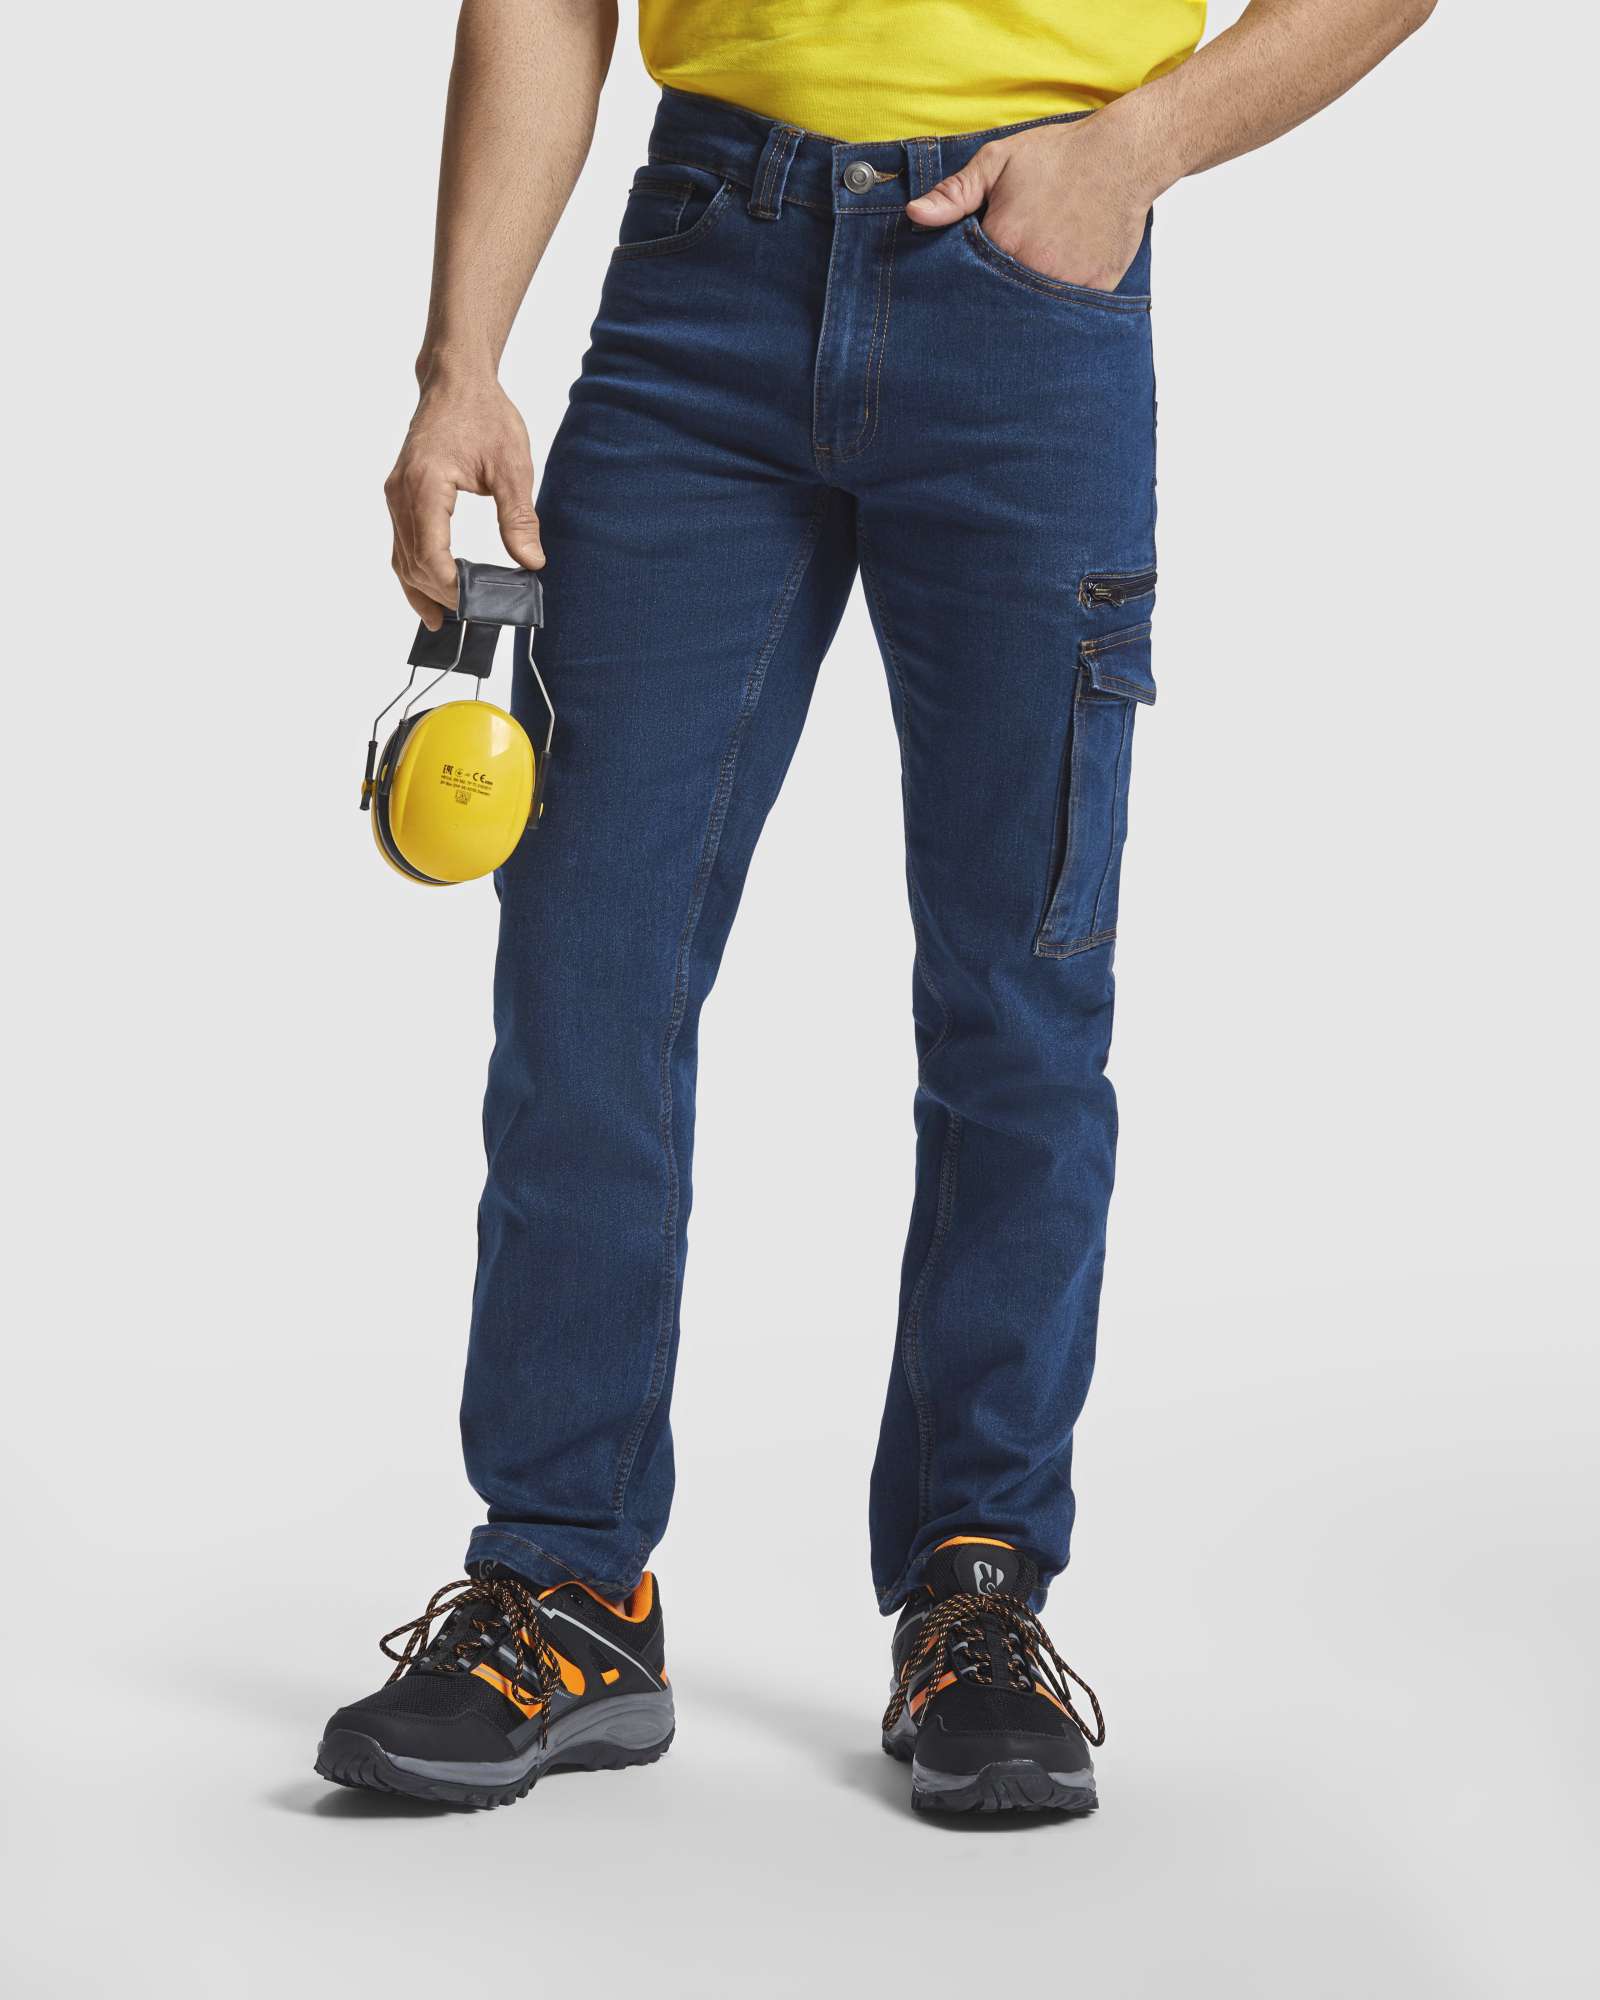 Roly Workwear Raptor Multipocket Jeans Blue Jeans 143 40 (RY8402)